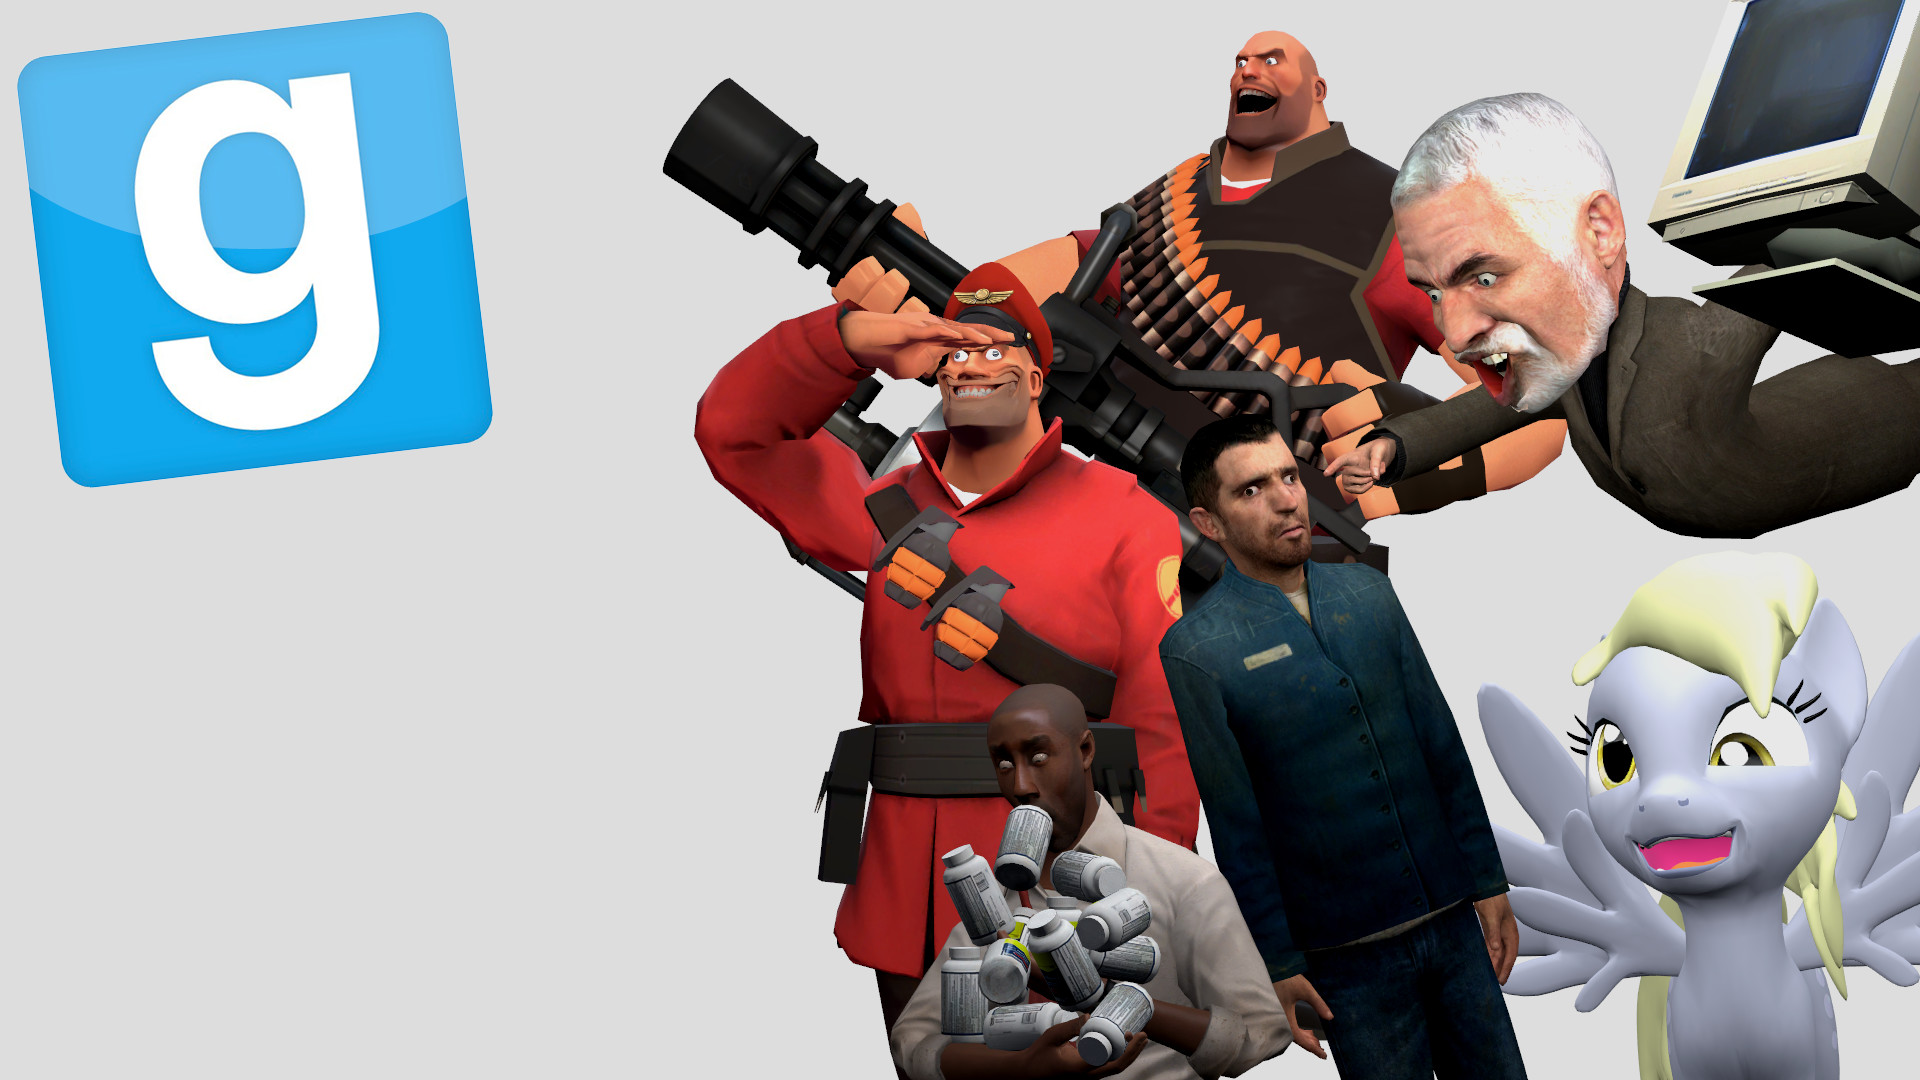 Gmod Wallpapers 76 Images 9600